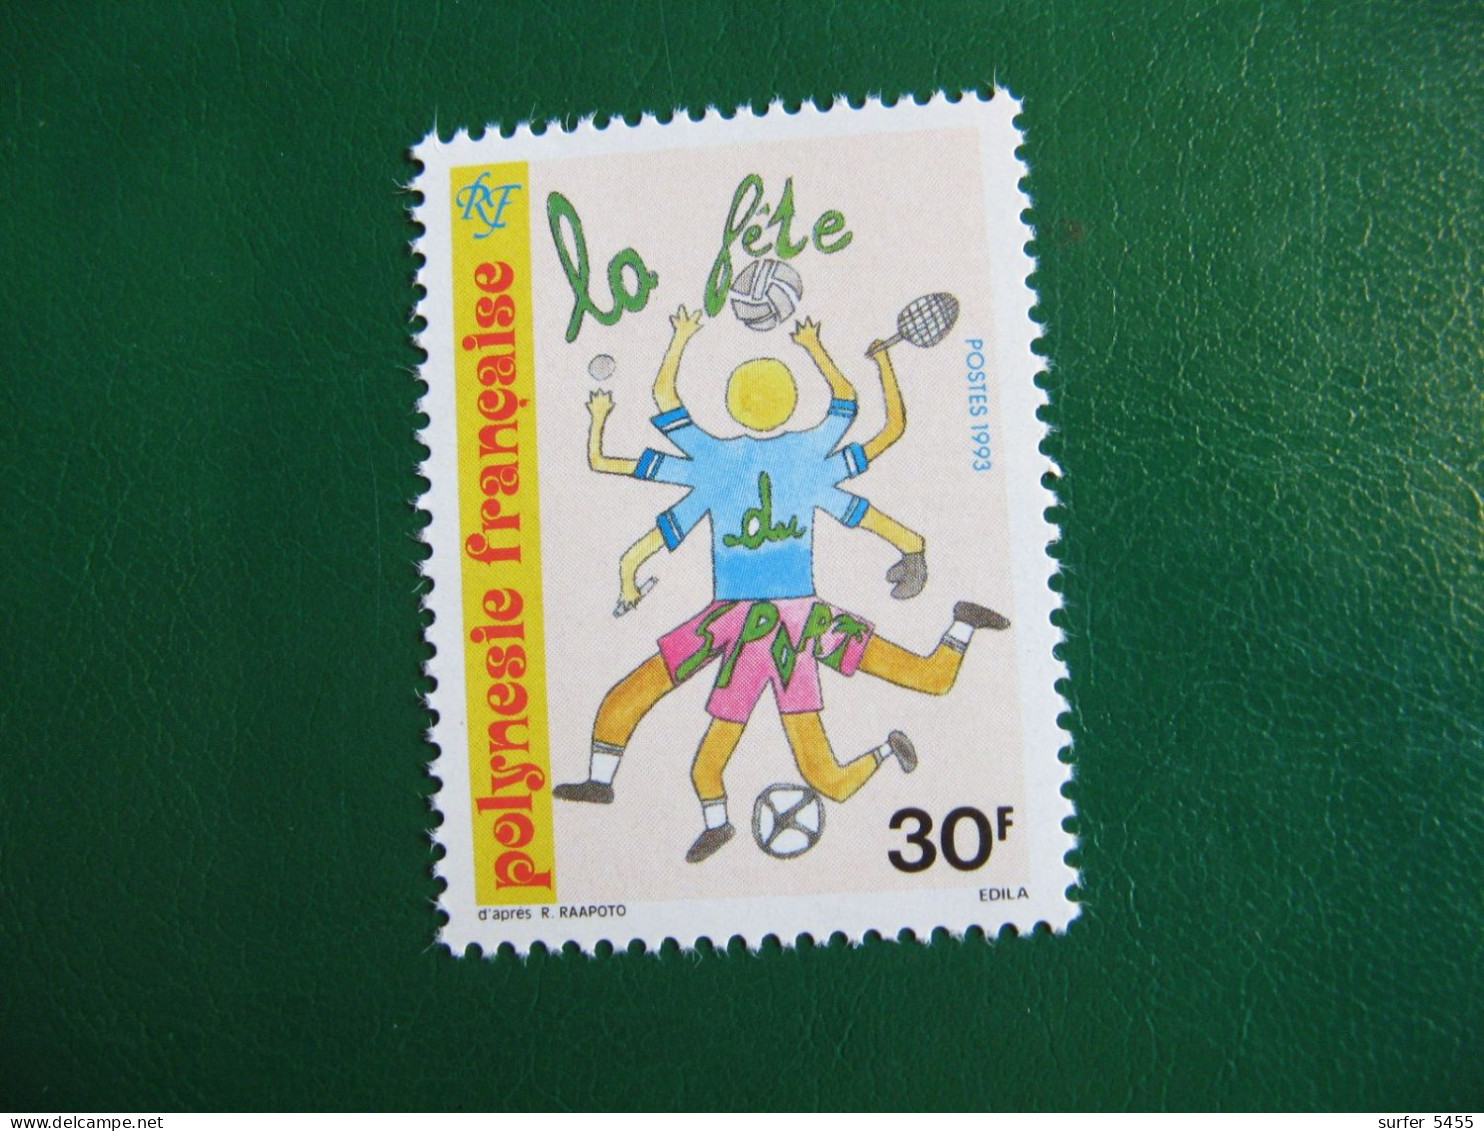 P0LYNESIE YVERT PO ORDINAIRE N° 436 TIMBRE NEUF ** LUXE - MNH - SERIE COMPLETE - COTE 1,10 EURO - Ungebraucht